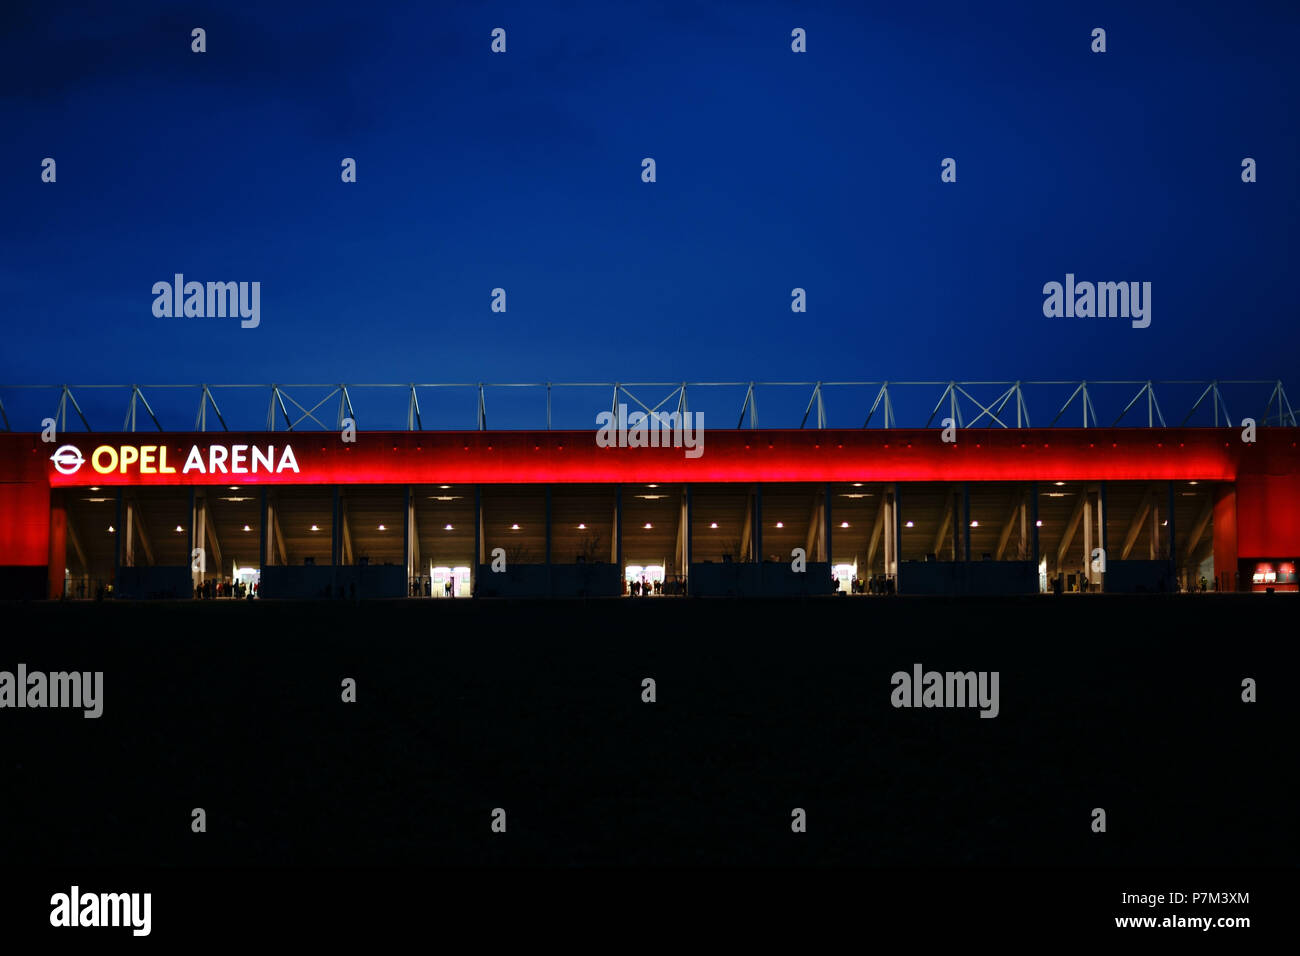 The brightly lit Opel Arena of the football club 1. FSV Mainz 05 at night. Stock Photo